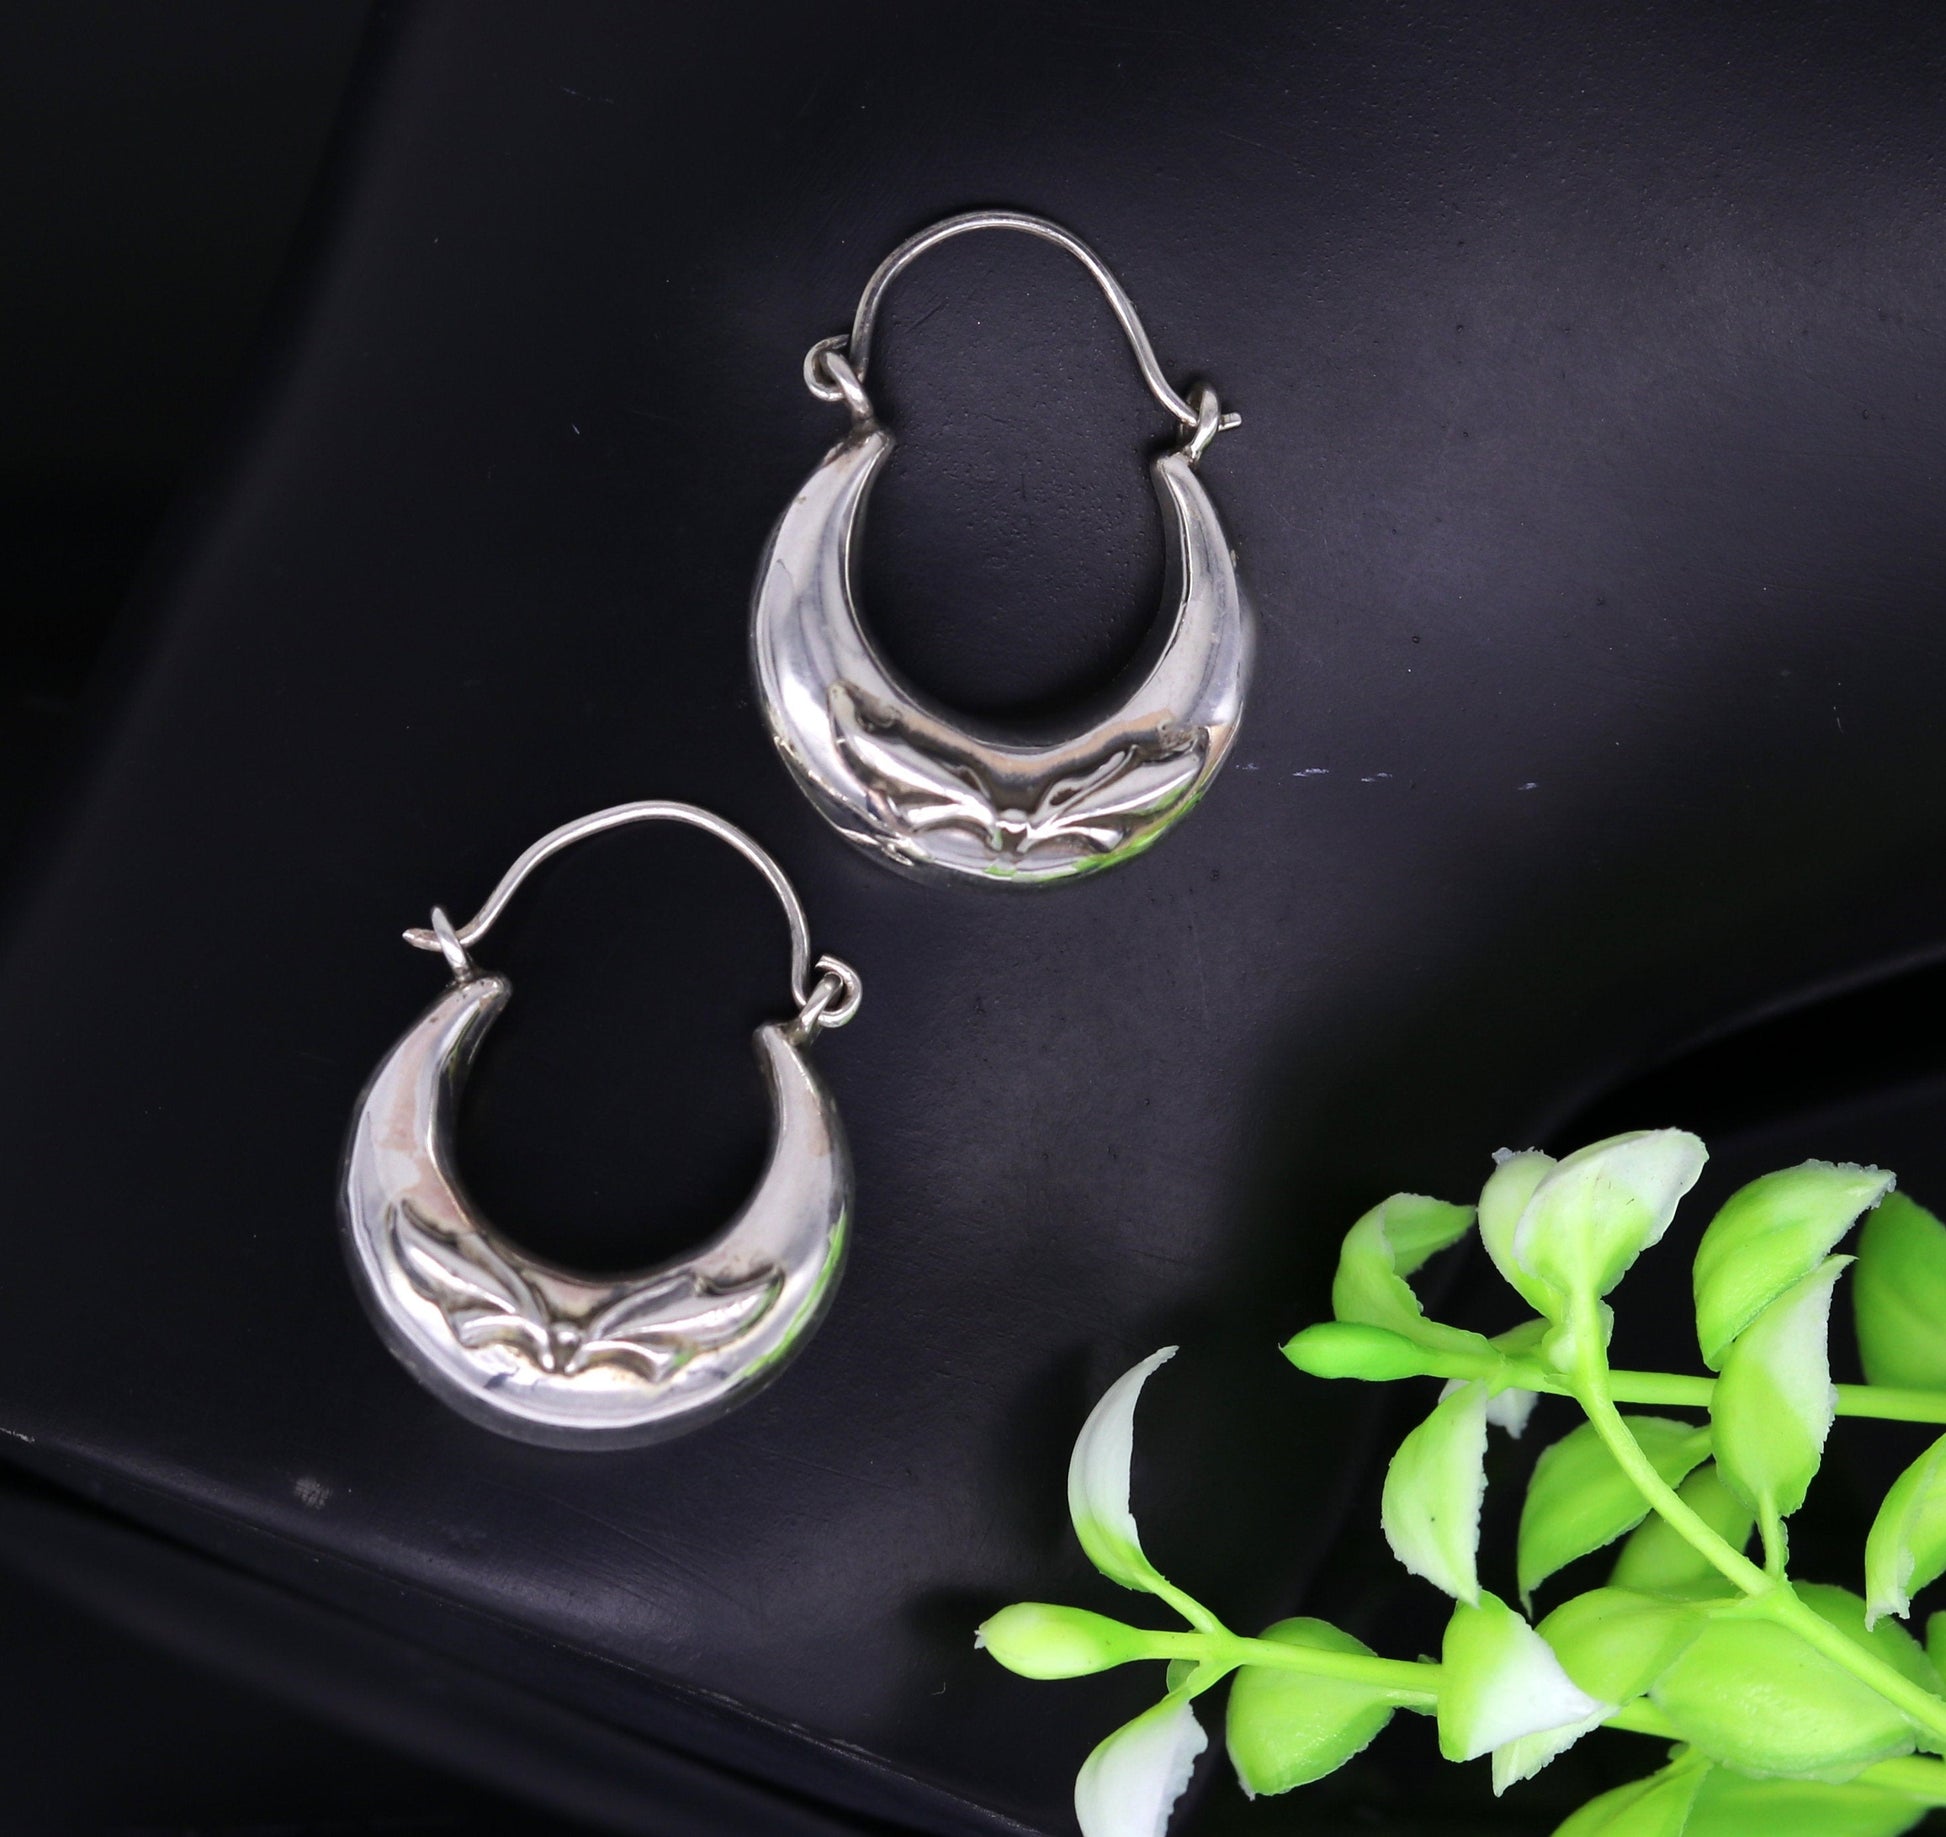 925 sterling silver handmade pretty attractive hoops stud earring bali, excellent customized stylish belly dance personalized gift ske7 - TRIBAL ORNAMENTS